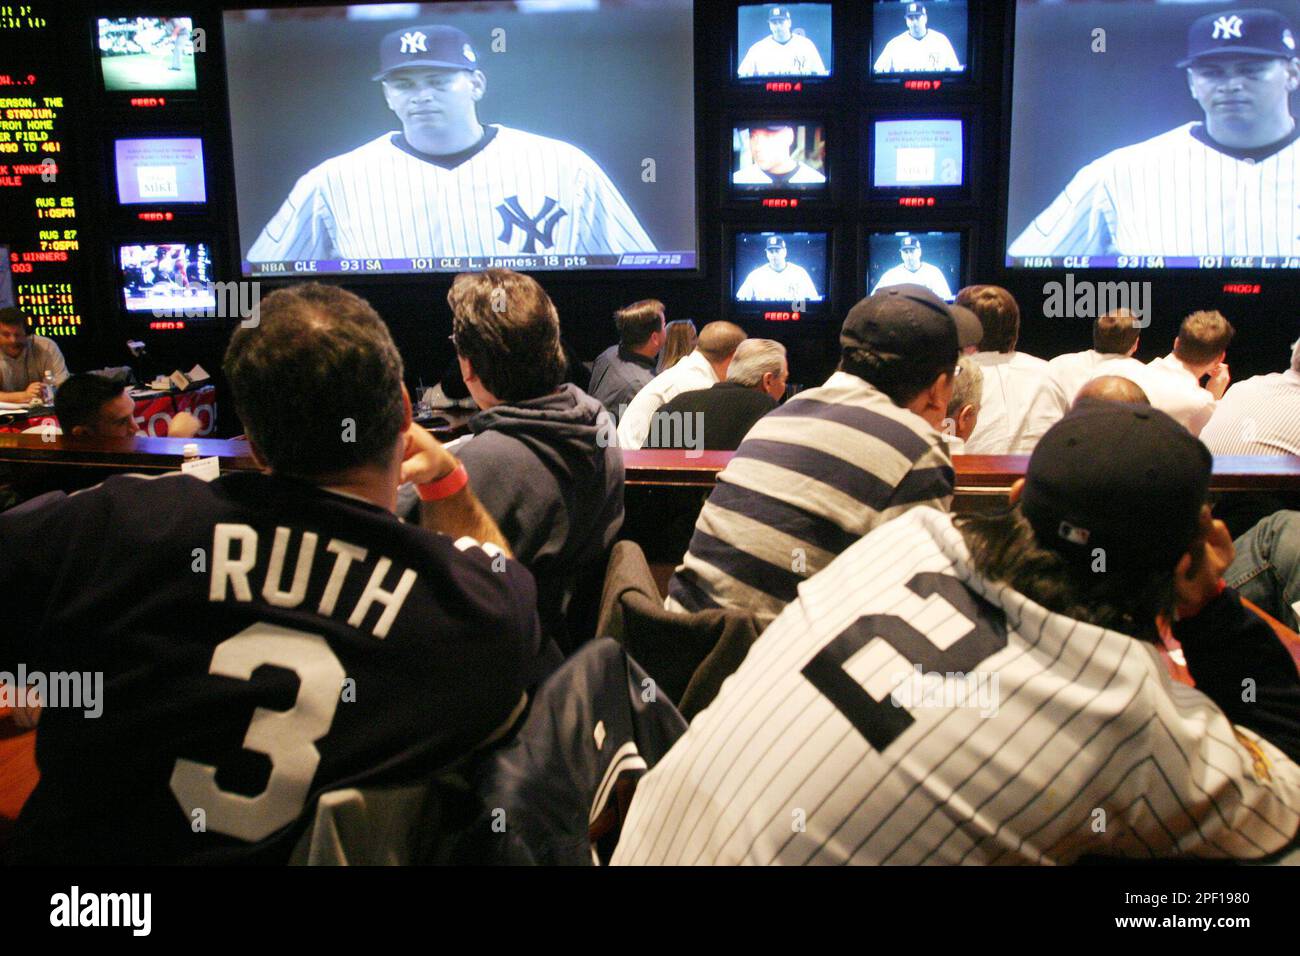 New York Yankees fans watch the opening game of the baseball season at the ESPN Zone Tuesday, March 30, 2004 in New York